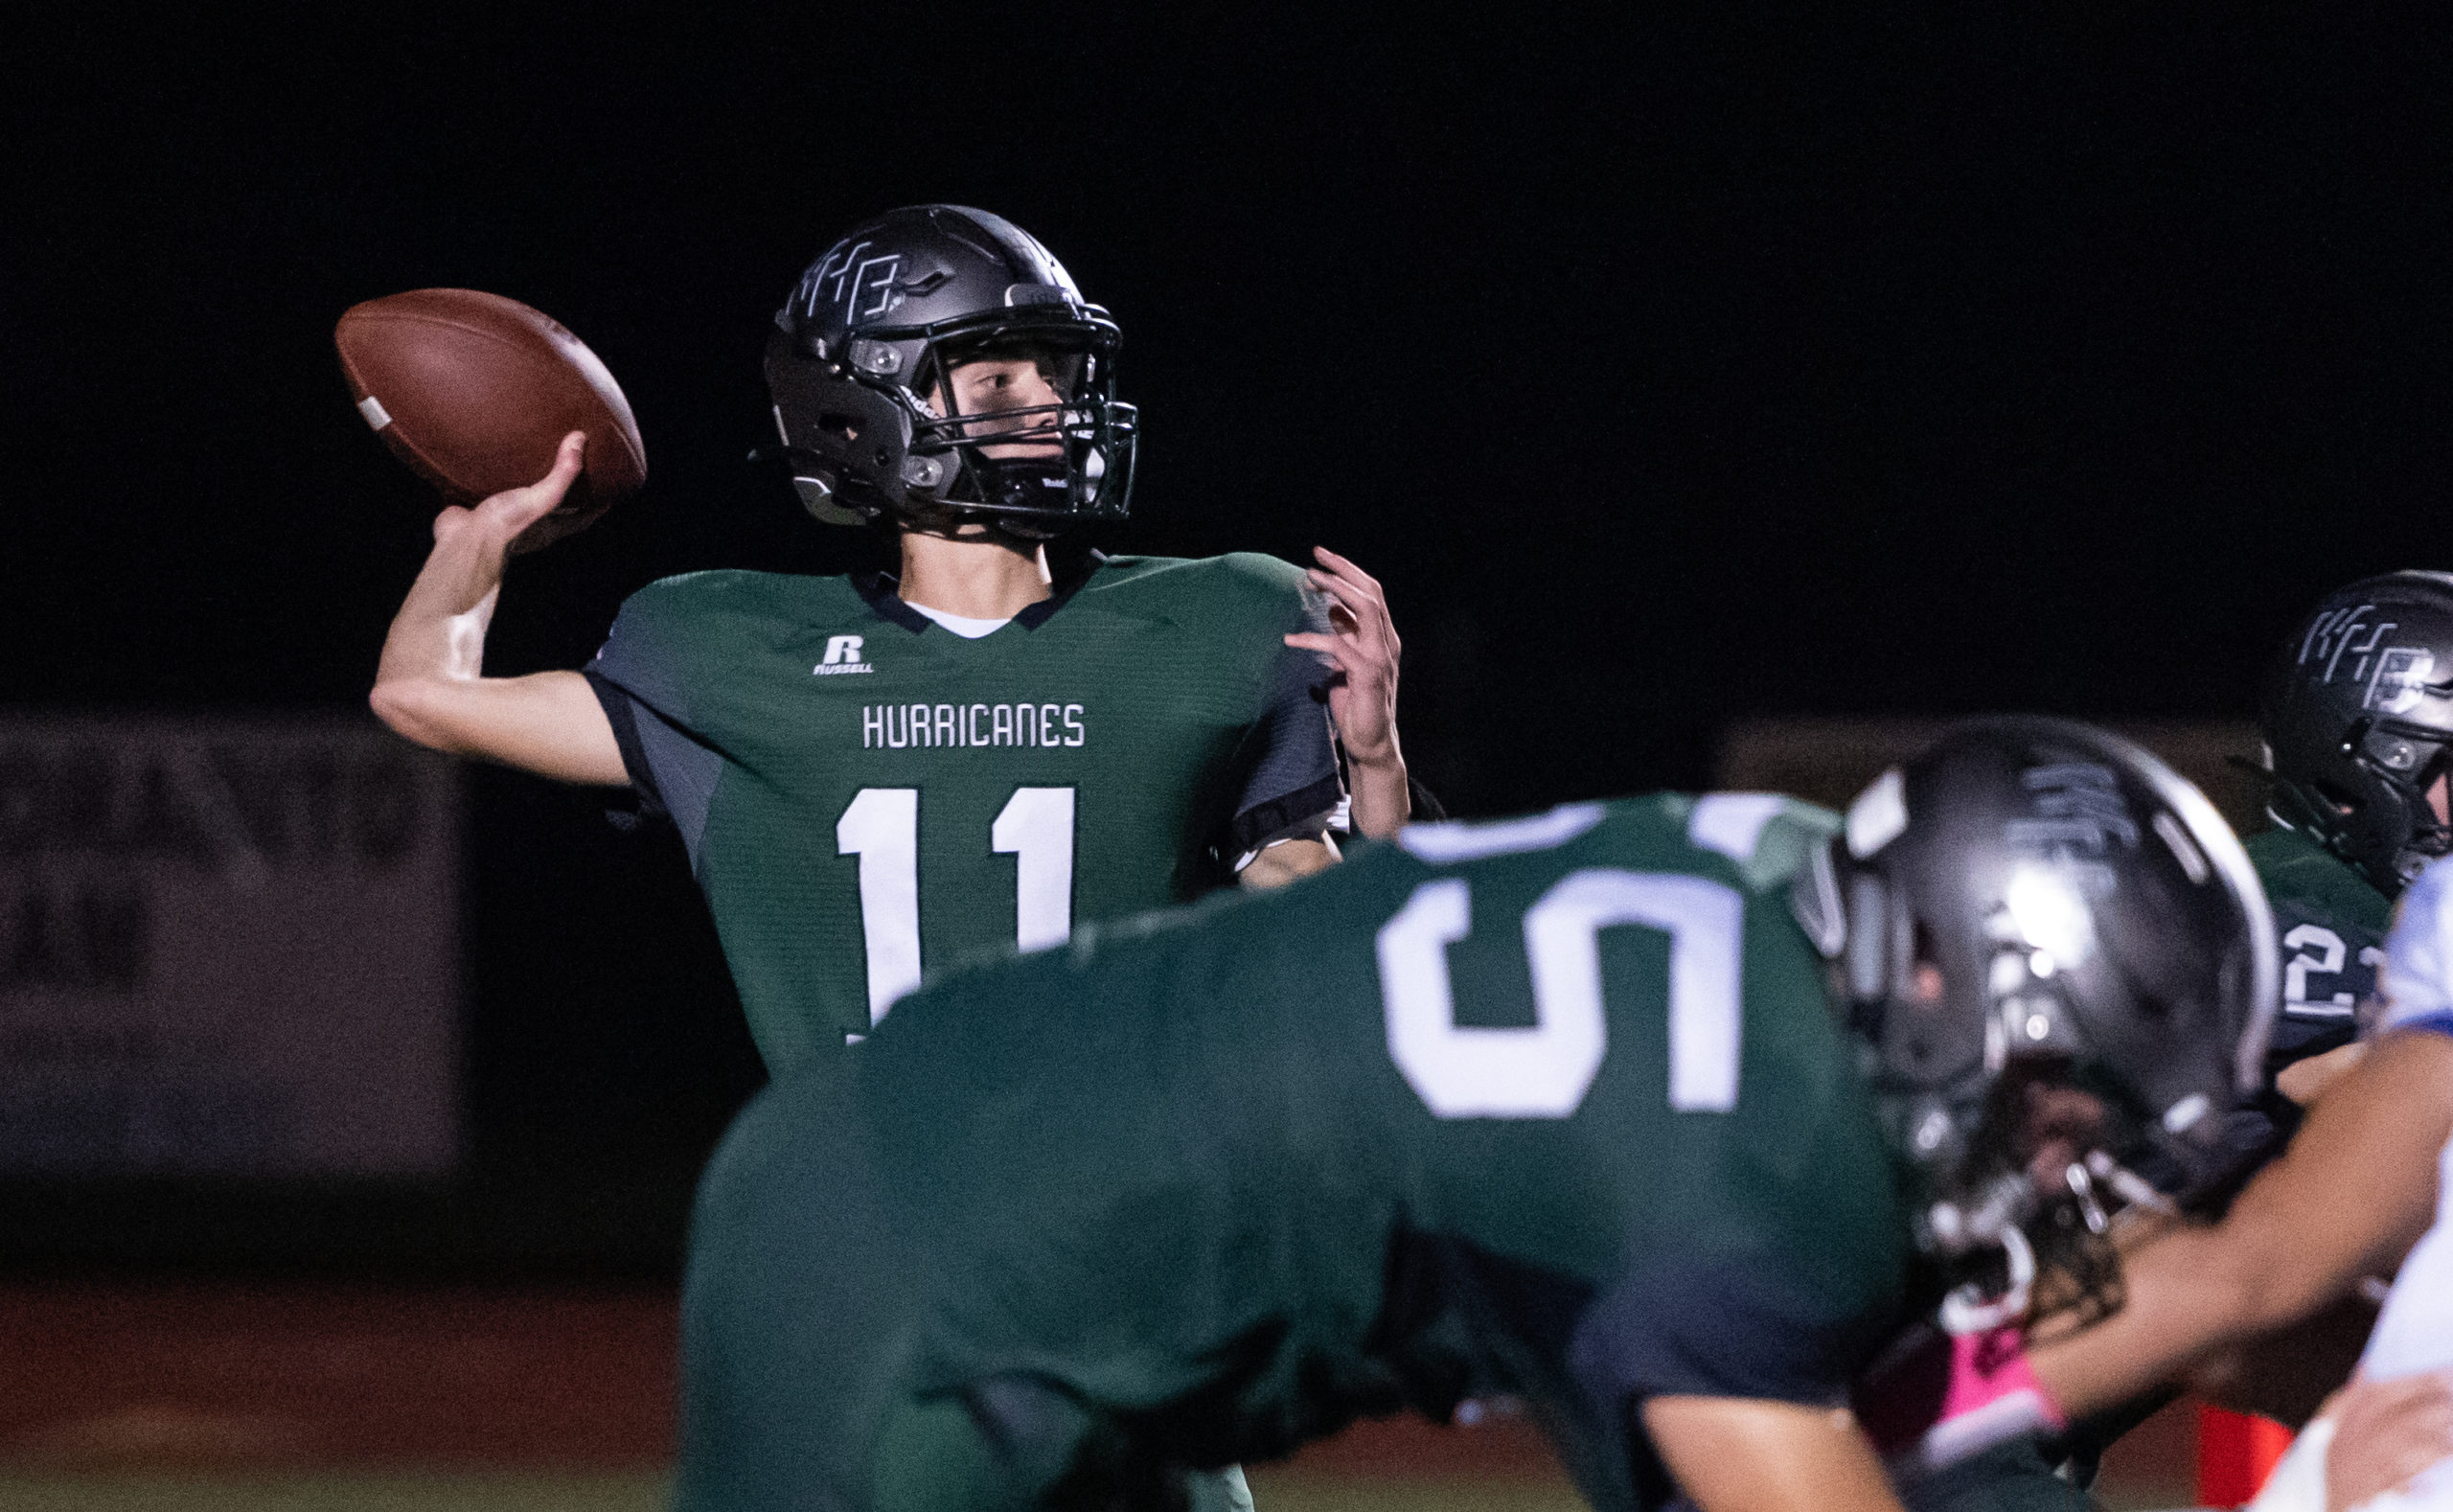 Westhampton Beach sophomore Will Gambino completed 11 of his 18 passes for 250 yards and four touchdowns on Friday night.